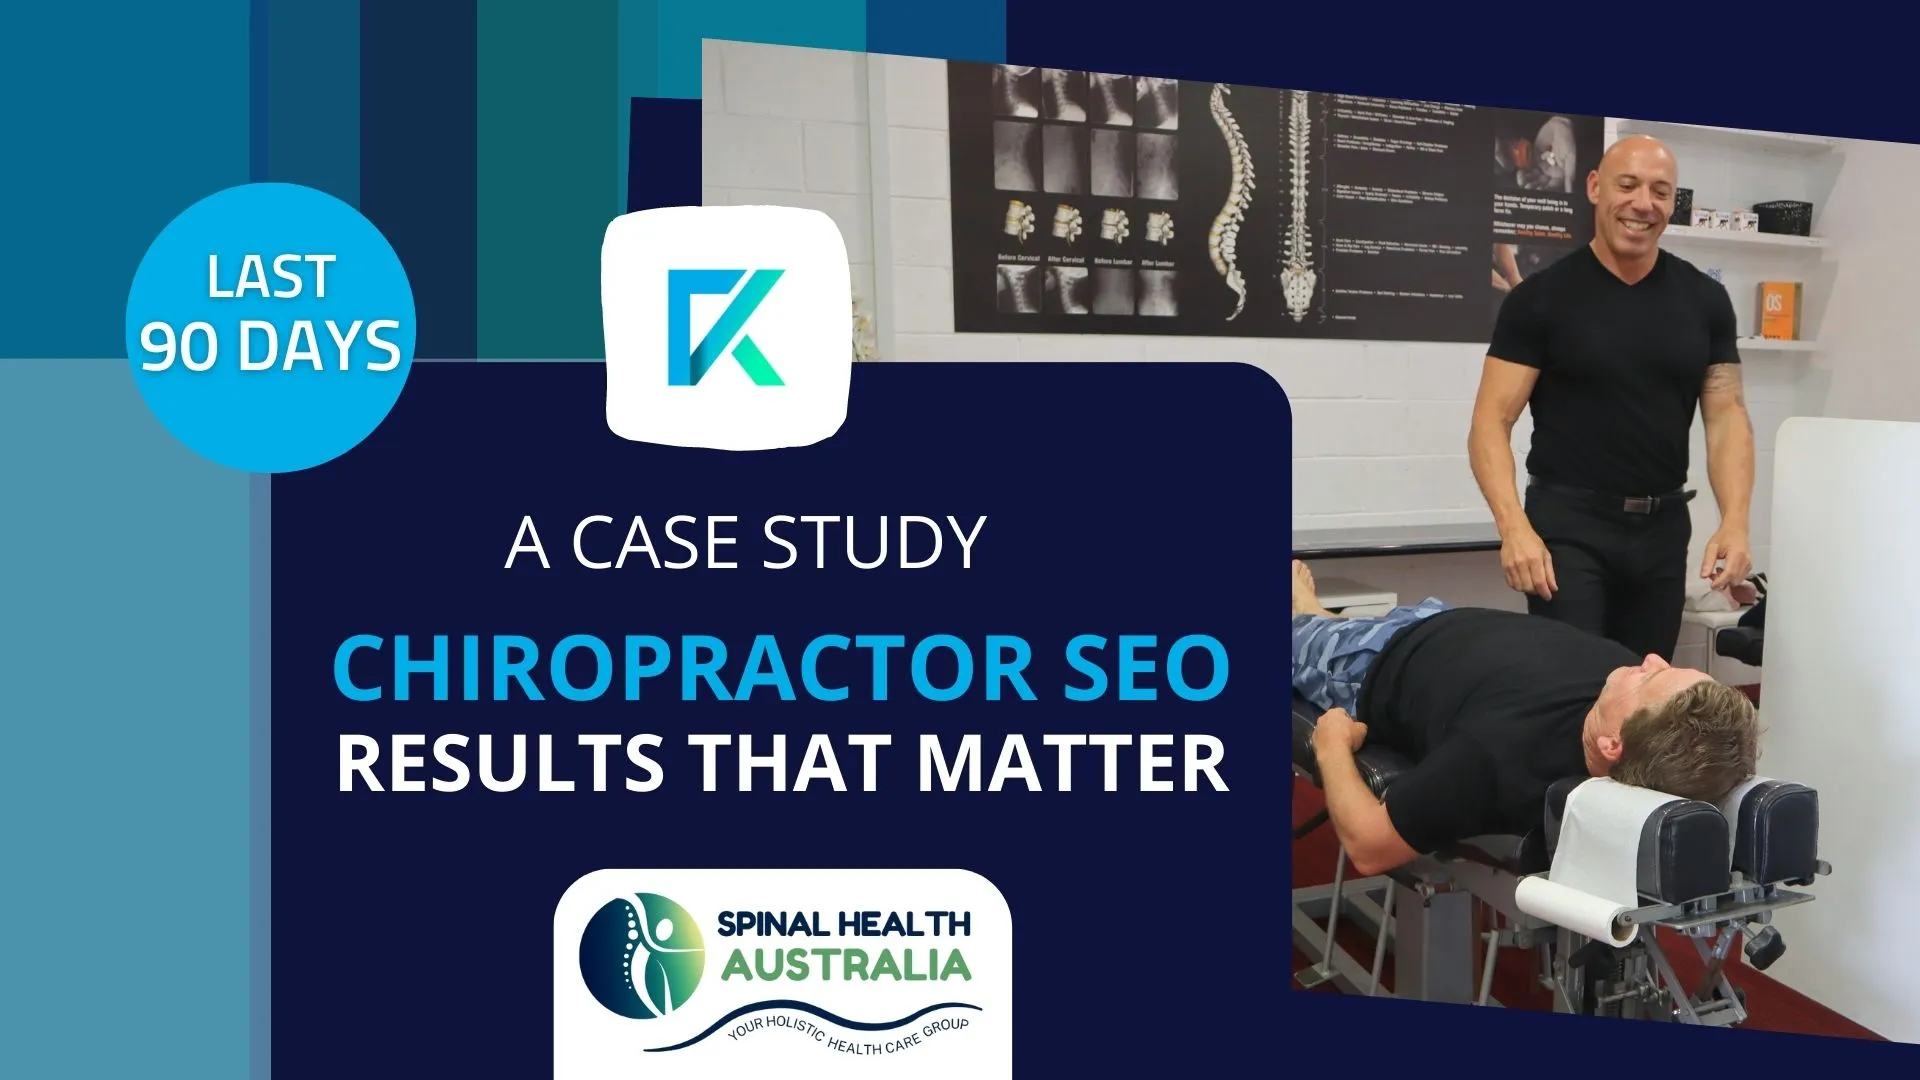 Chiropractor SEO a case study